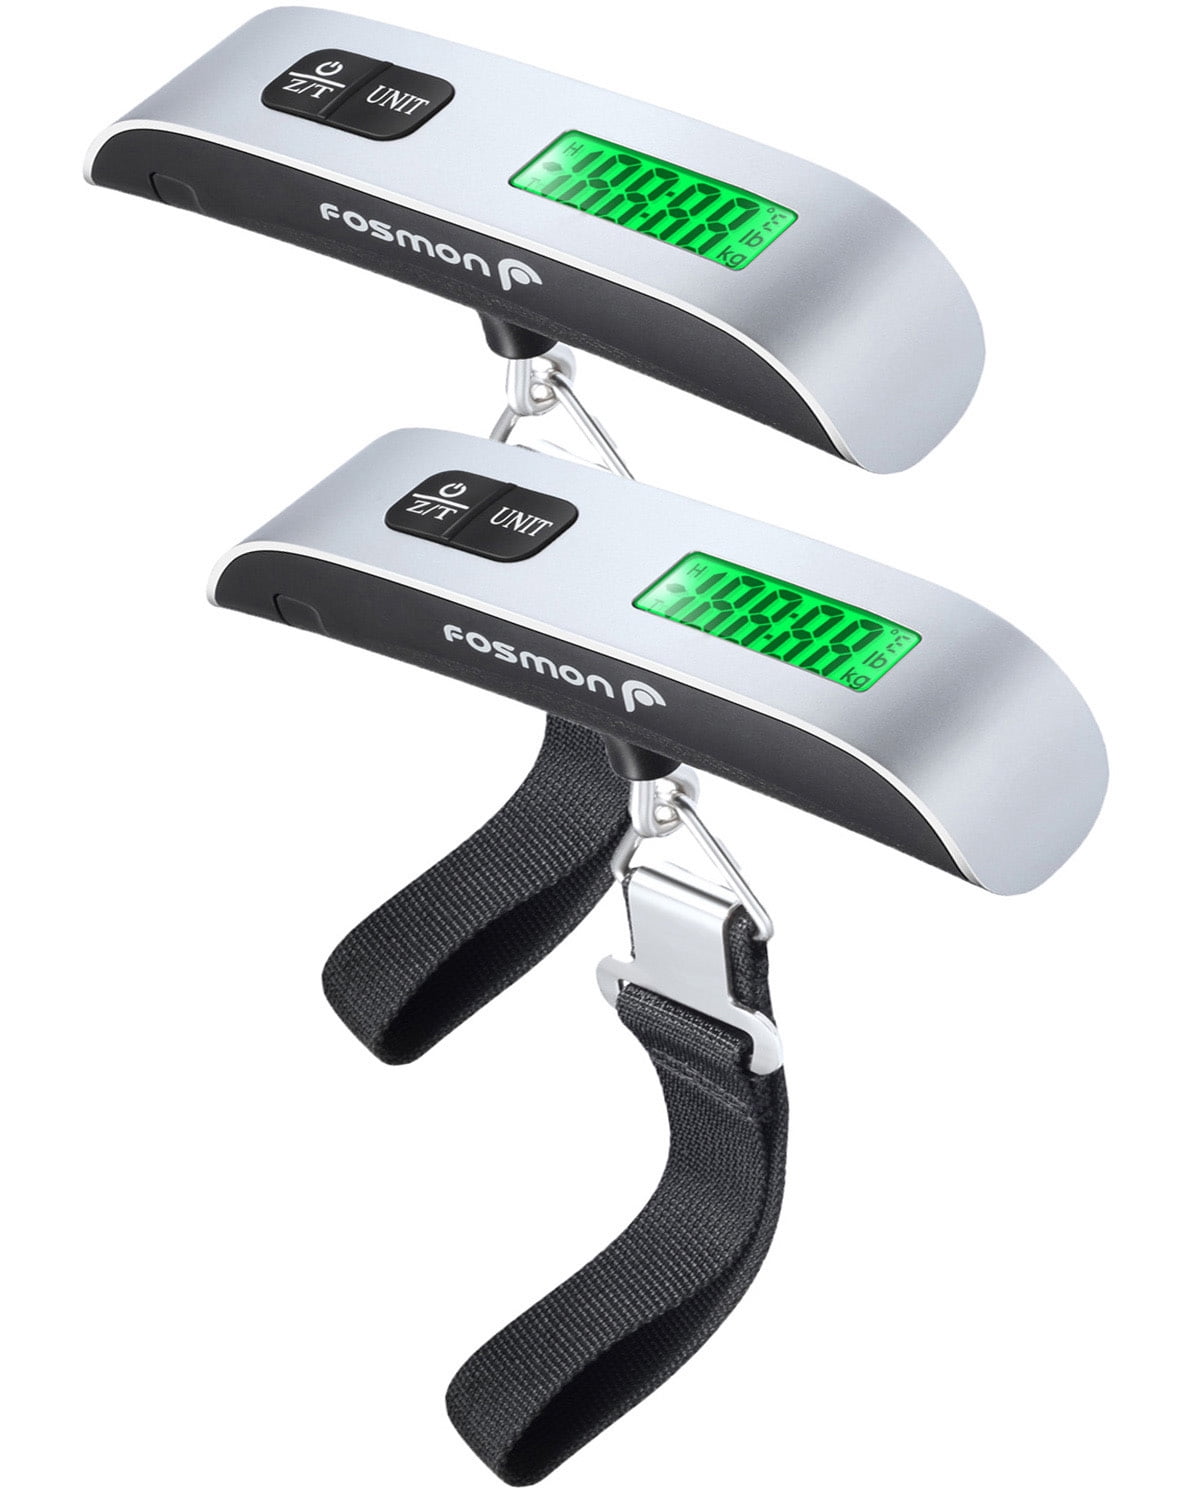 Digital Luggage Scale (2 Pack), Digital LCD Display Backlight with